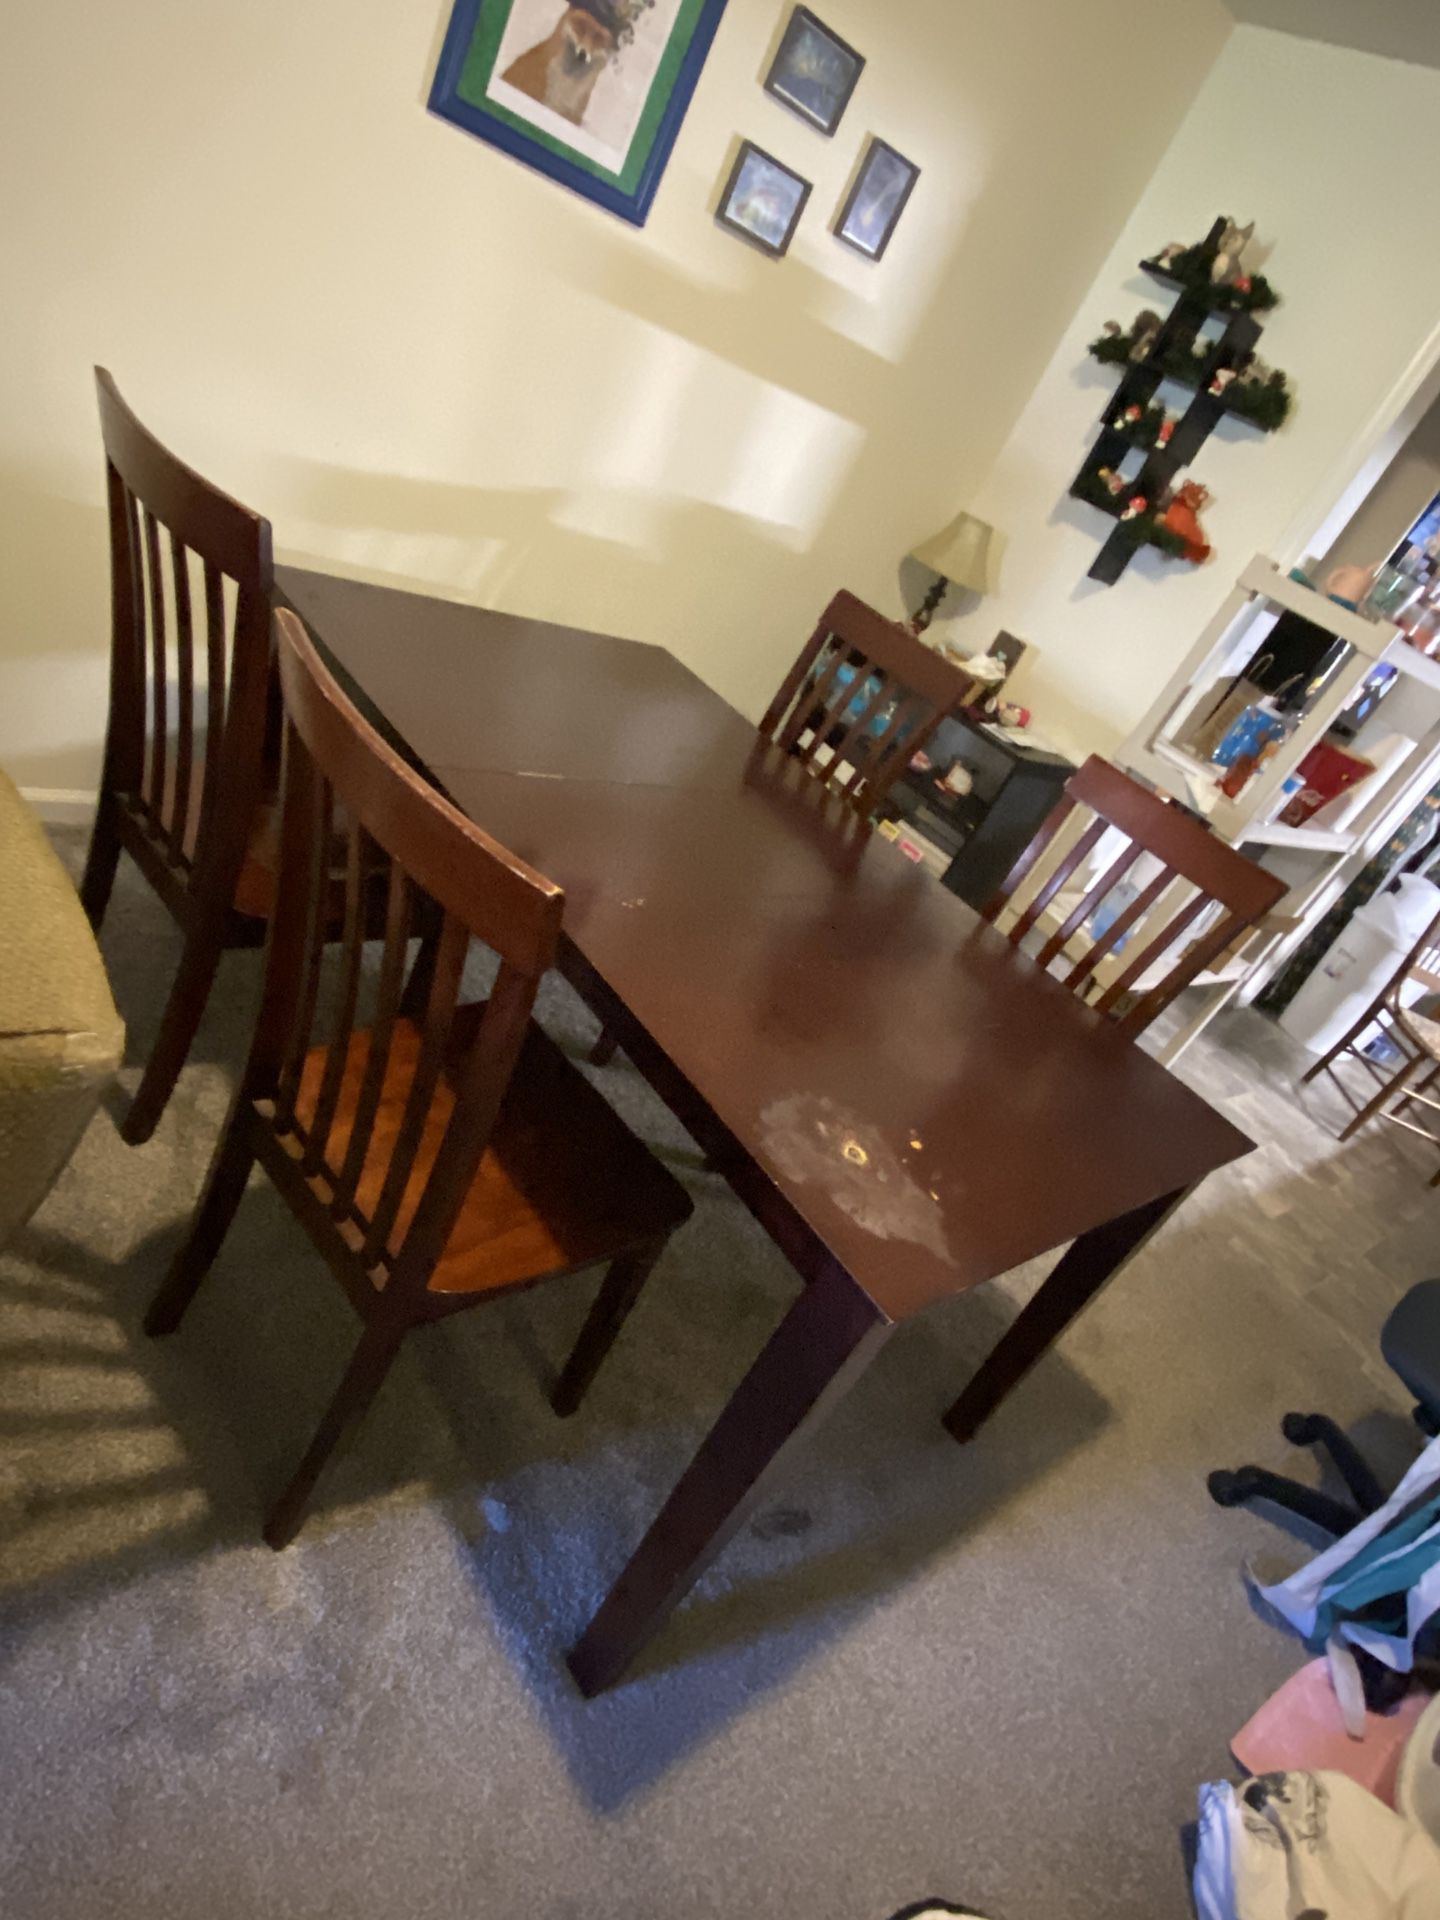 Dark Cherry Table And Chairs